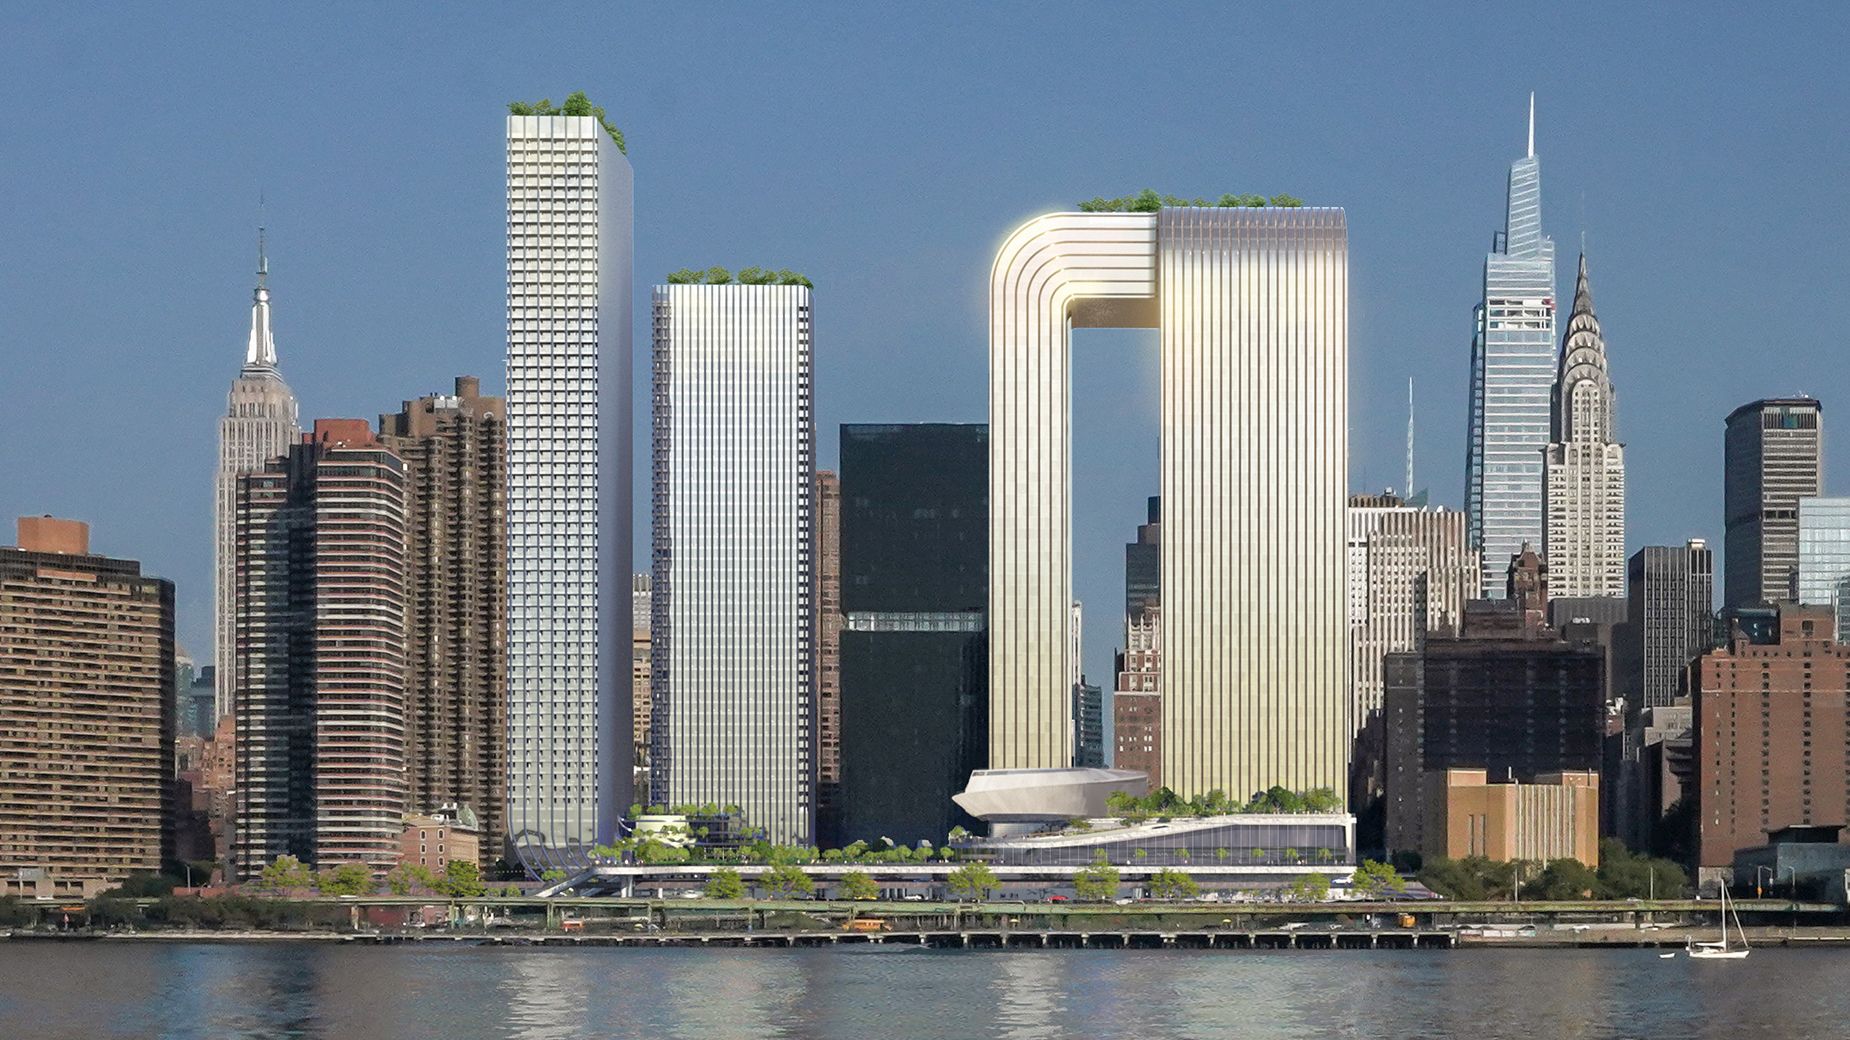 The Freedom Plaza proposal features four high-rises, a museum and acres of public space beside the East River.